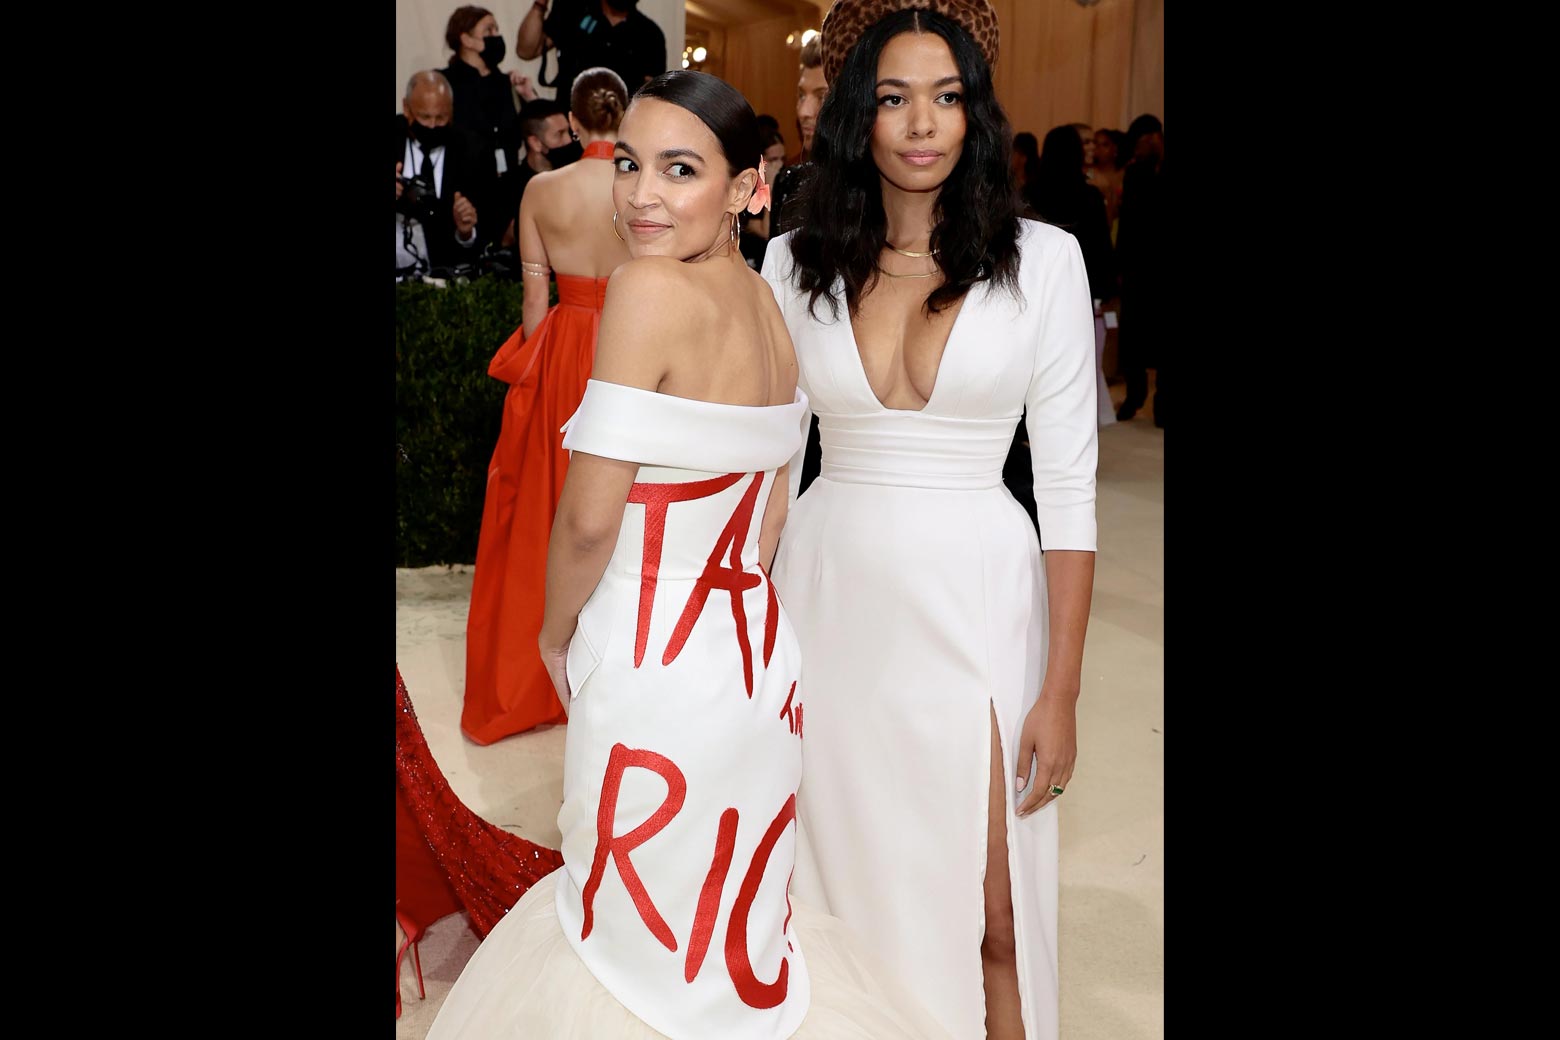 AOC’s Met Gala dress is not the statement she thinks it is.